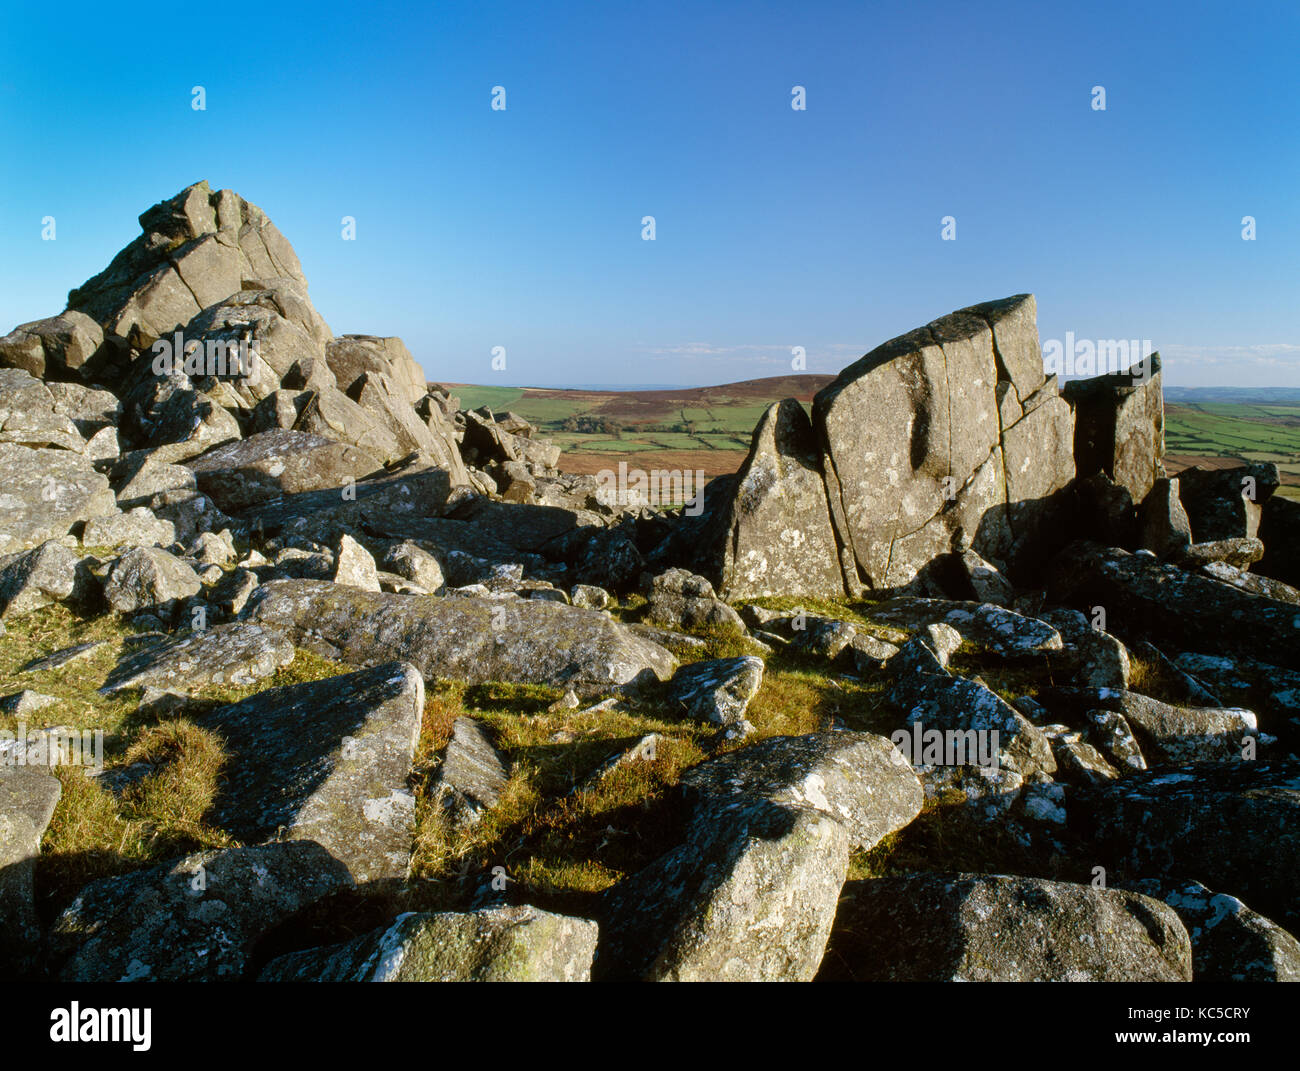 Carn Menyn outcrop of distinctive blue-grey dolerite on Mynydd Preseli, One of the possible sources of 'bluestones' used in the building of Stonehenge Stock Photo